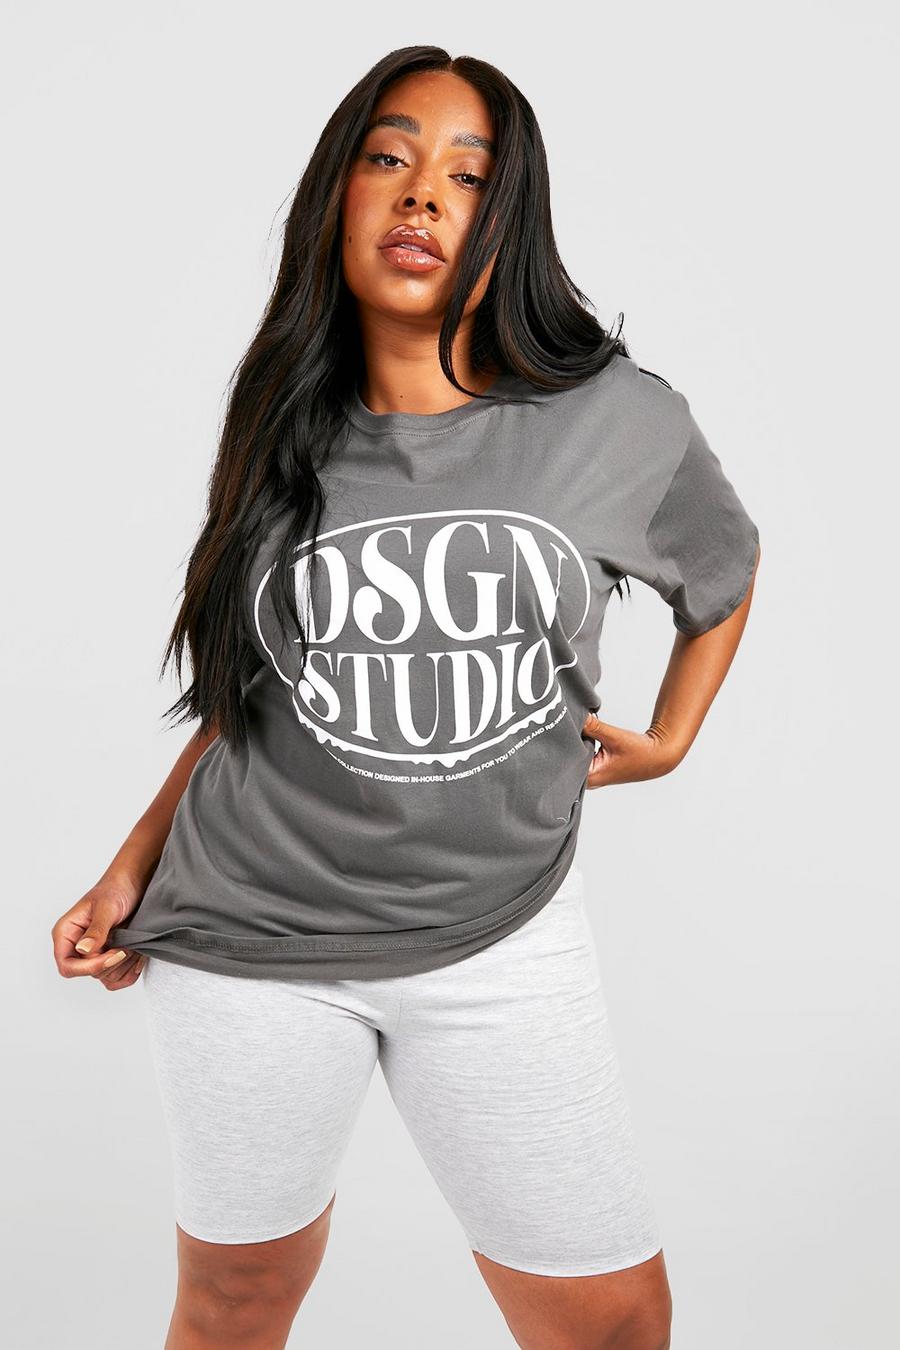 T-shirt Plus Size oversize con stampa Dsgn Studio sul petto, Charcoal image number 1